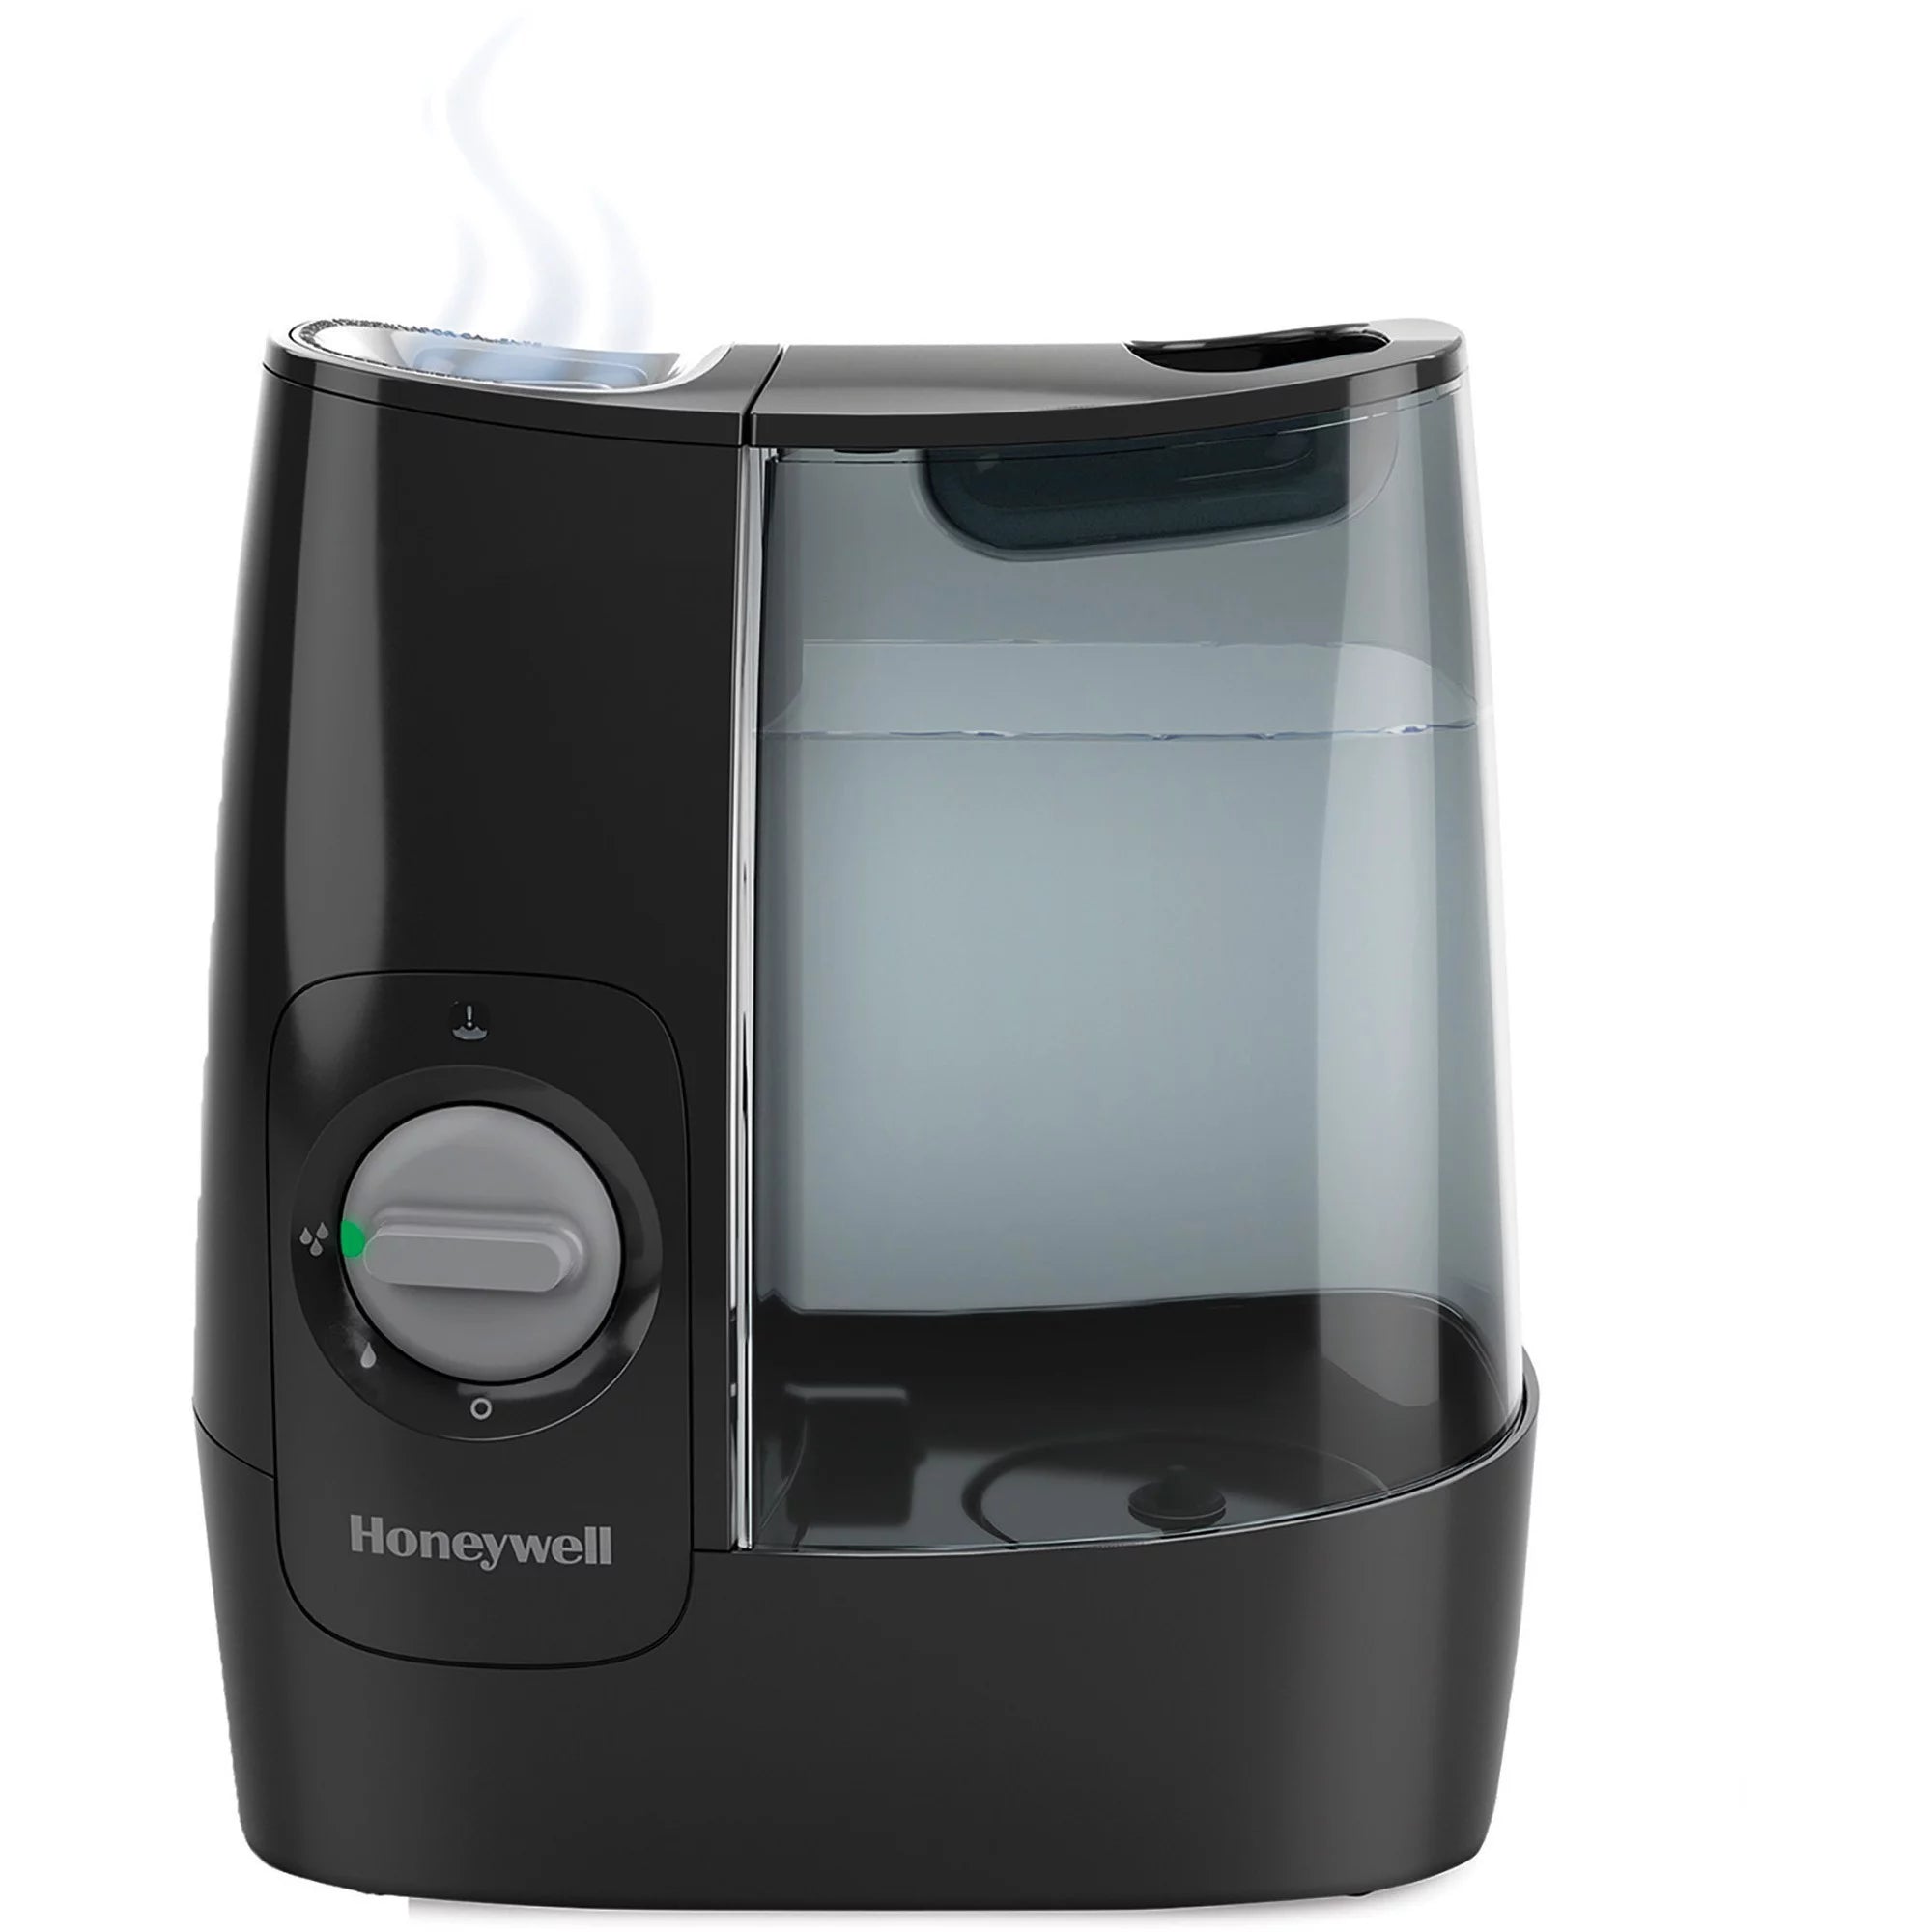 Honeywell Warm Mist Humidifier with Essential Oil Cup, Filter Free, HWM845, Black